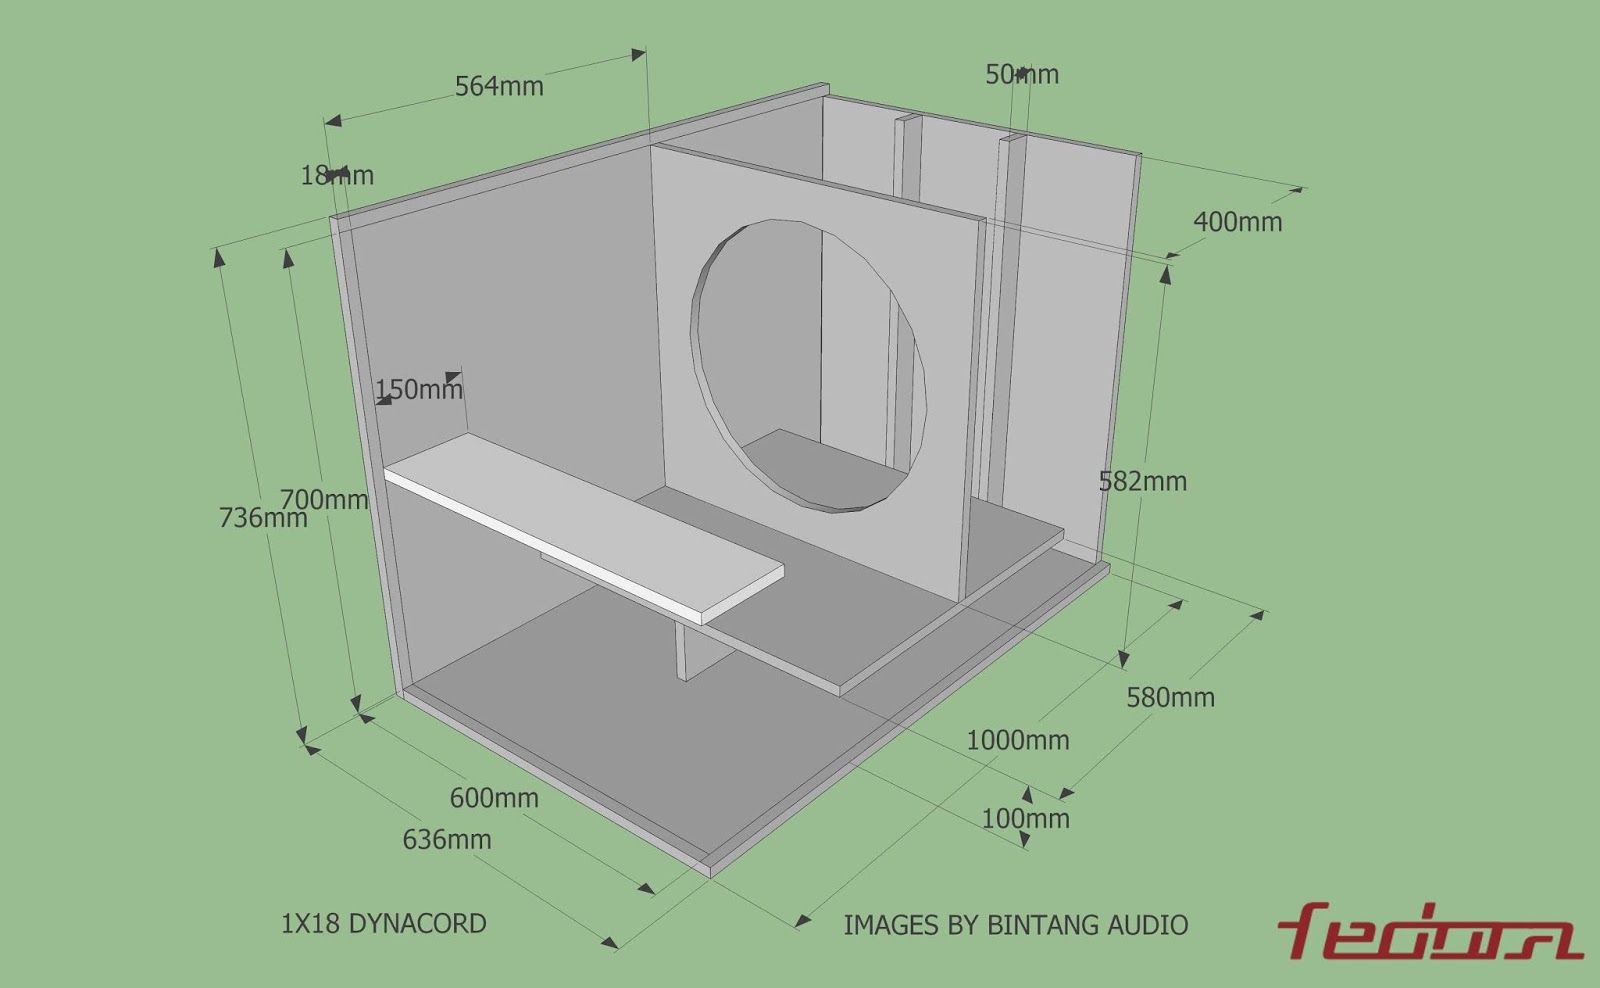 Dynacord Speaker Plan with full schematics and measurements